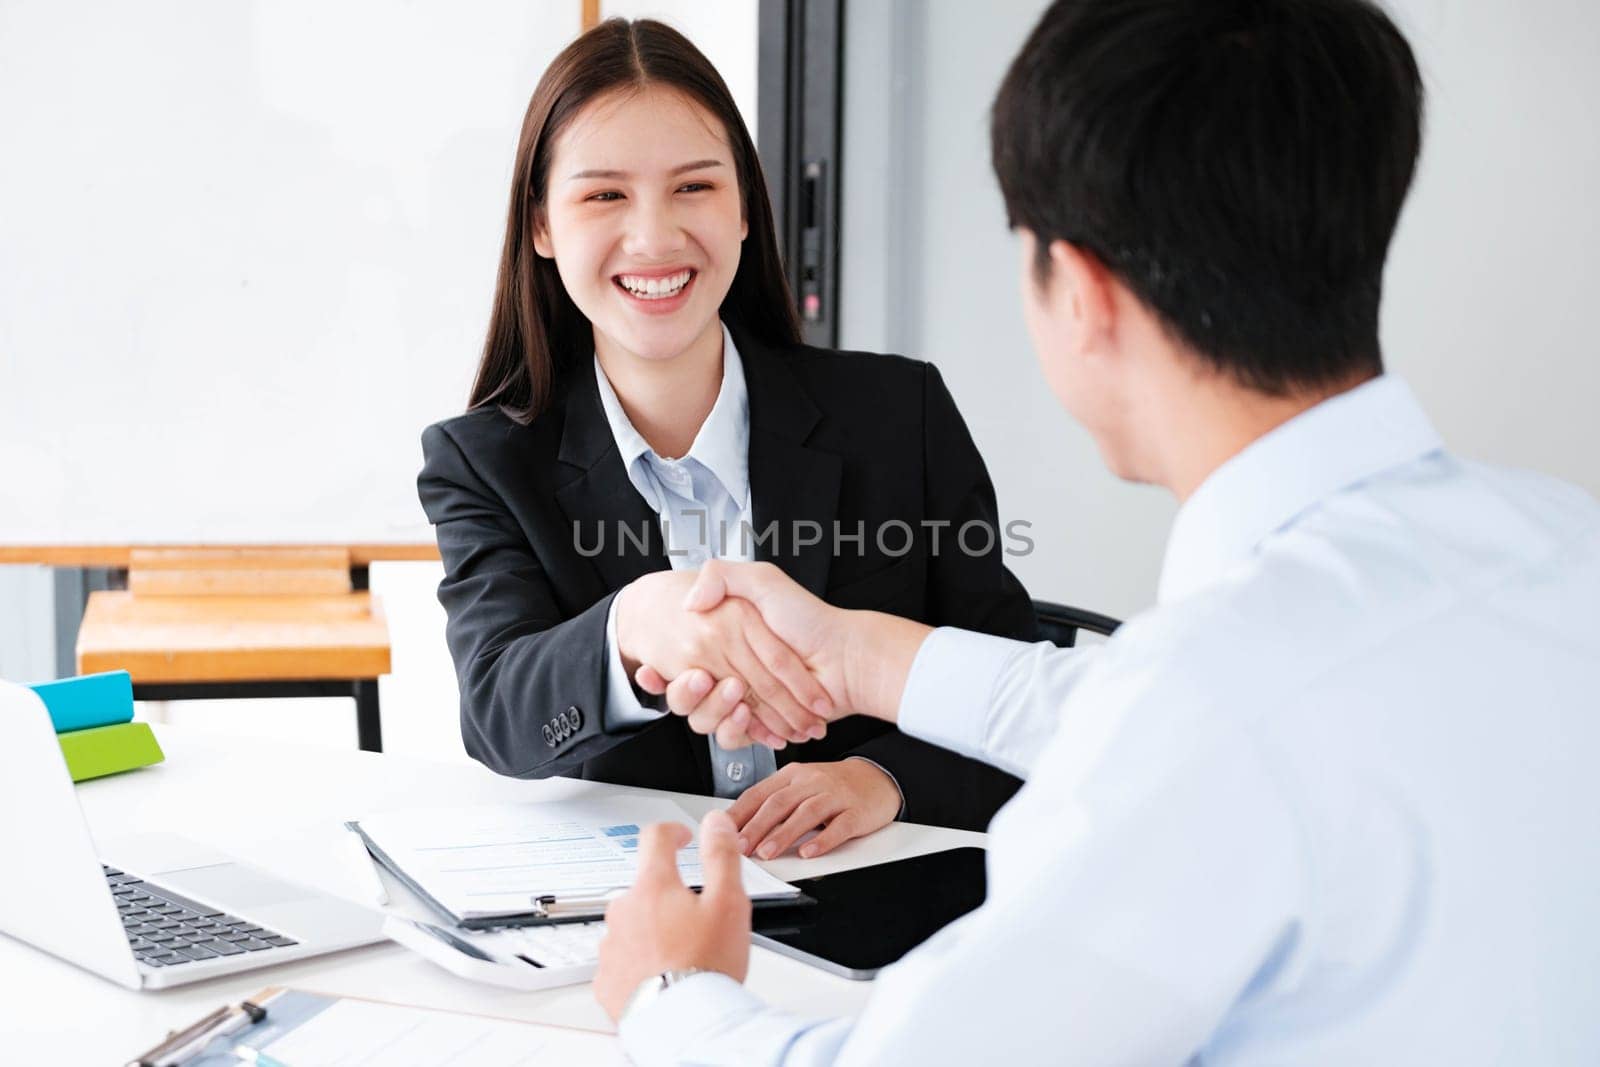 A young businesswoman smiles while shaking hands, making a positive impression during a professional meeting.